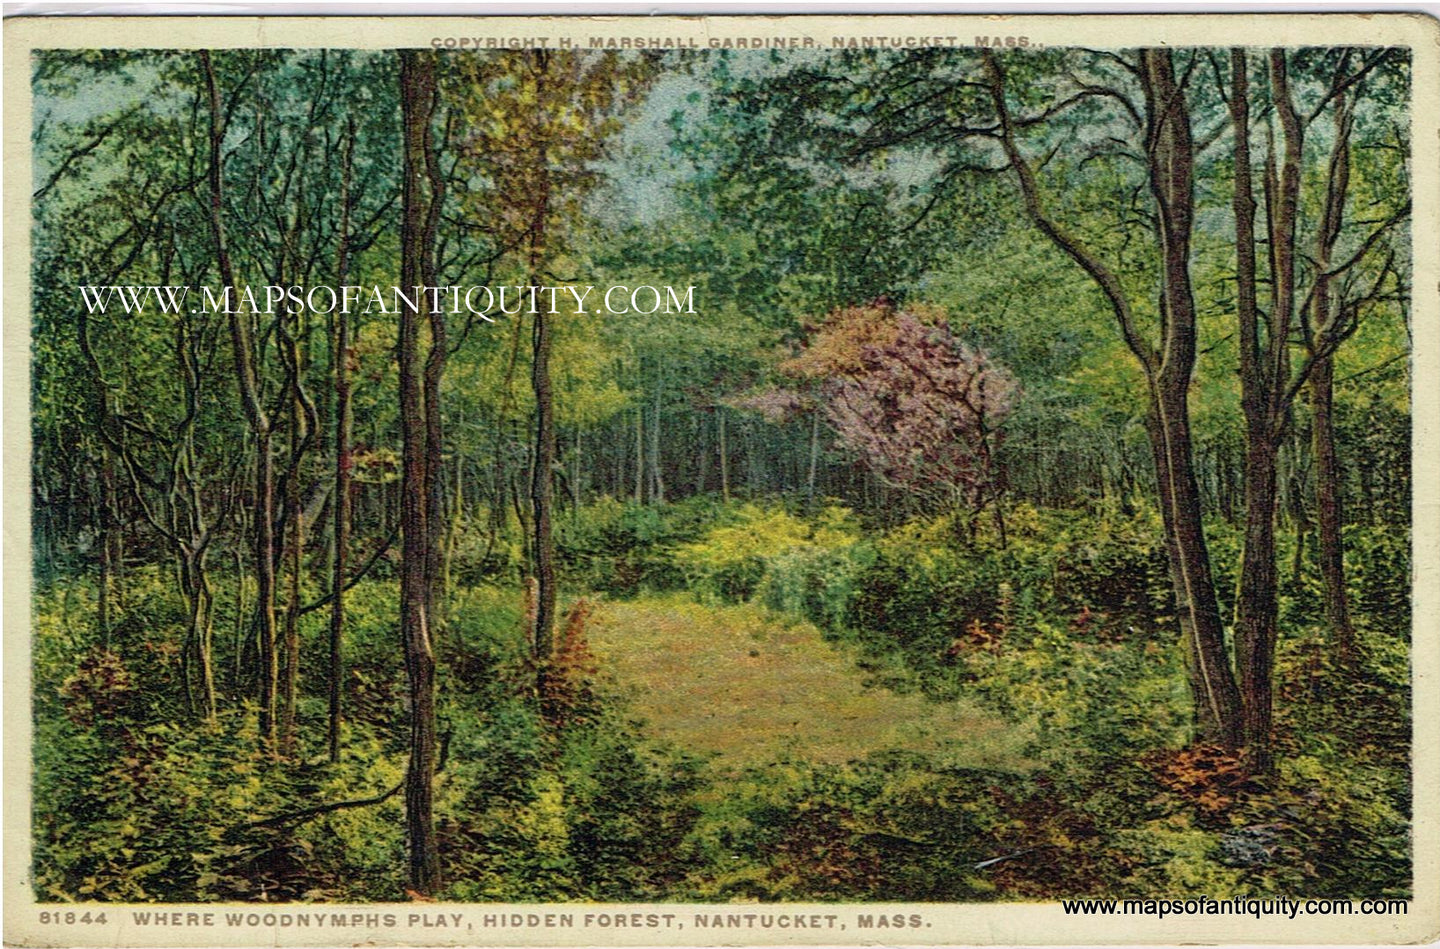 Antique-Colored-Postcard-81844-Where-Woodnymphs-Play-Hidden-Forest-Nantucket-Mass---Postcard-******-Postcard-Cape-Cod-and-Islands-1915-1930-H.-Marshall-Gardiner-Maps-Of-Antiquity